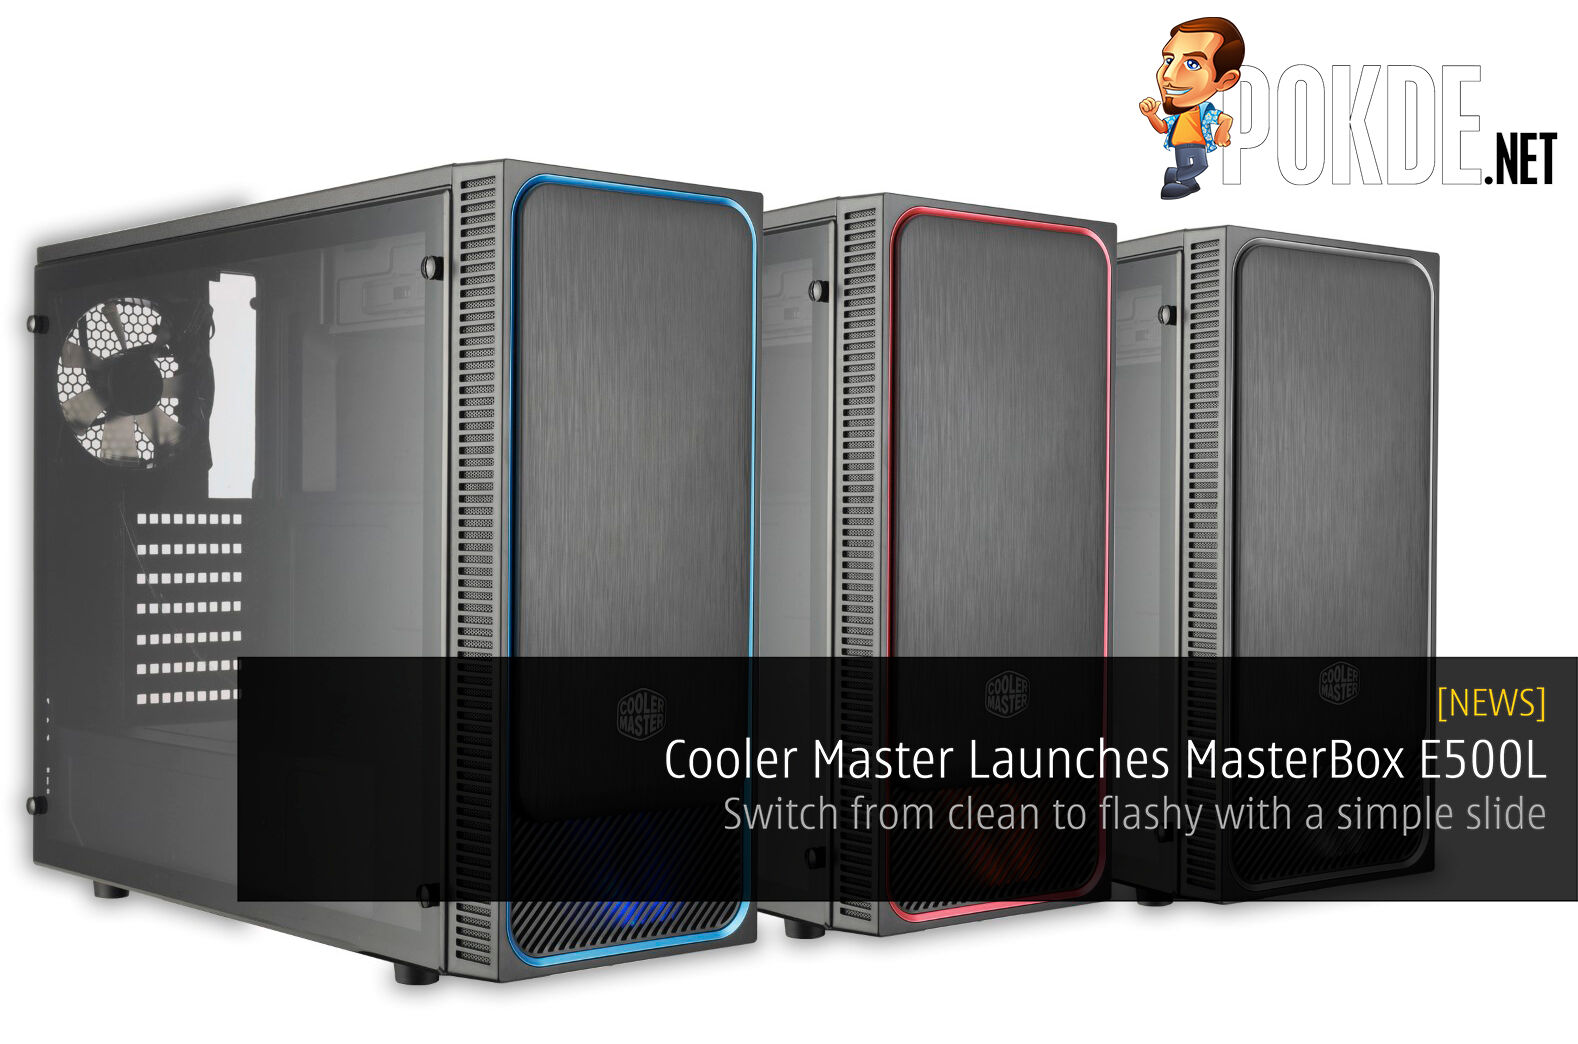 Cooler Master Launches MasterBox E500L - Switch from clean to flashy with a simple slide 24